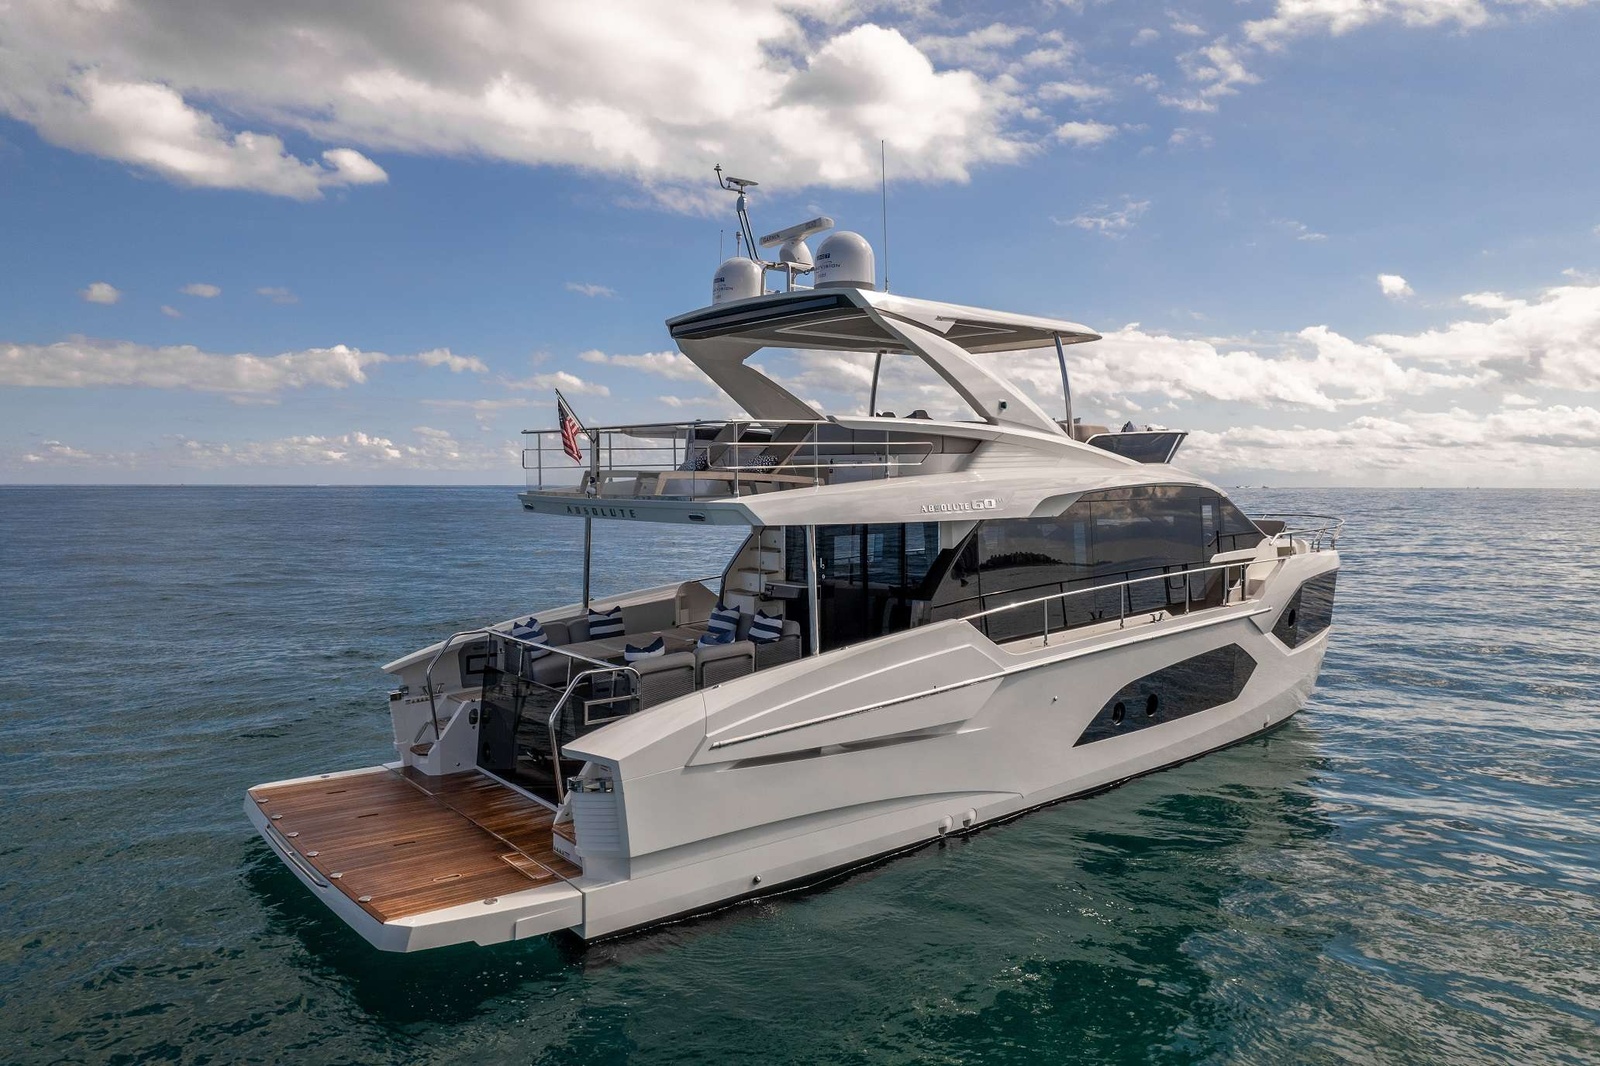 Born to reveal new and endless possibilities, the 60 FLY – The Absolute Prisma is a revolutionary model, uniquely built with a very high level of innovation for a yacht of this size. The external lines are enriched by elegant, transparent barriers which offer breathtaking views both from the flybridge and the aft cockpit. In a new progression of our cockpit design, Moreover, thanks to two convenient side stairwells, the large swim platform is easily accessed for you to enjoy right at the water’s edge. The flybridge area on the upper deck serves as a second outdoor living room ideal to sunbathe, enjoy a cocktail, and navigate while socializing. The galley, dining, and relaxation zones, offer extreme livability, elegant lines, beautiful color contrasts, and lovely finishes. The bow area is also designed for maximum versatility thanks to a sunbathing zone and a comfortable sofa with a table. This is the perfect spot to listen to music, socialize, and enjoy some privacy; all in one, day and night.